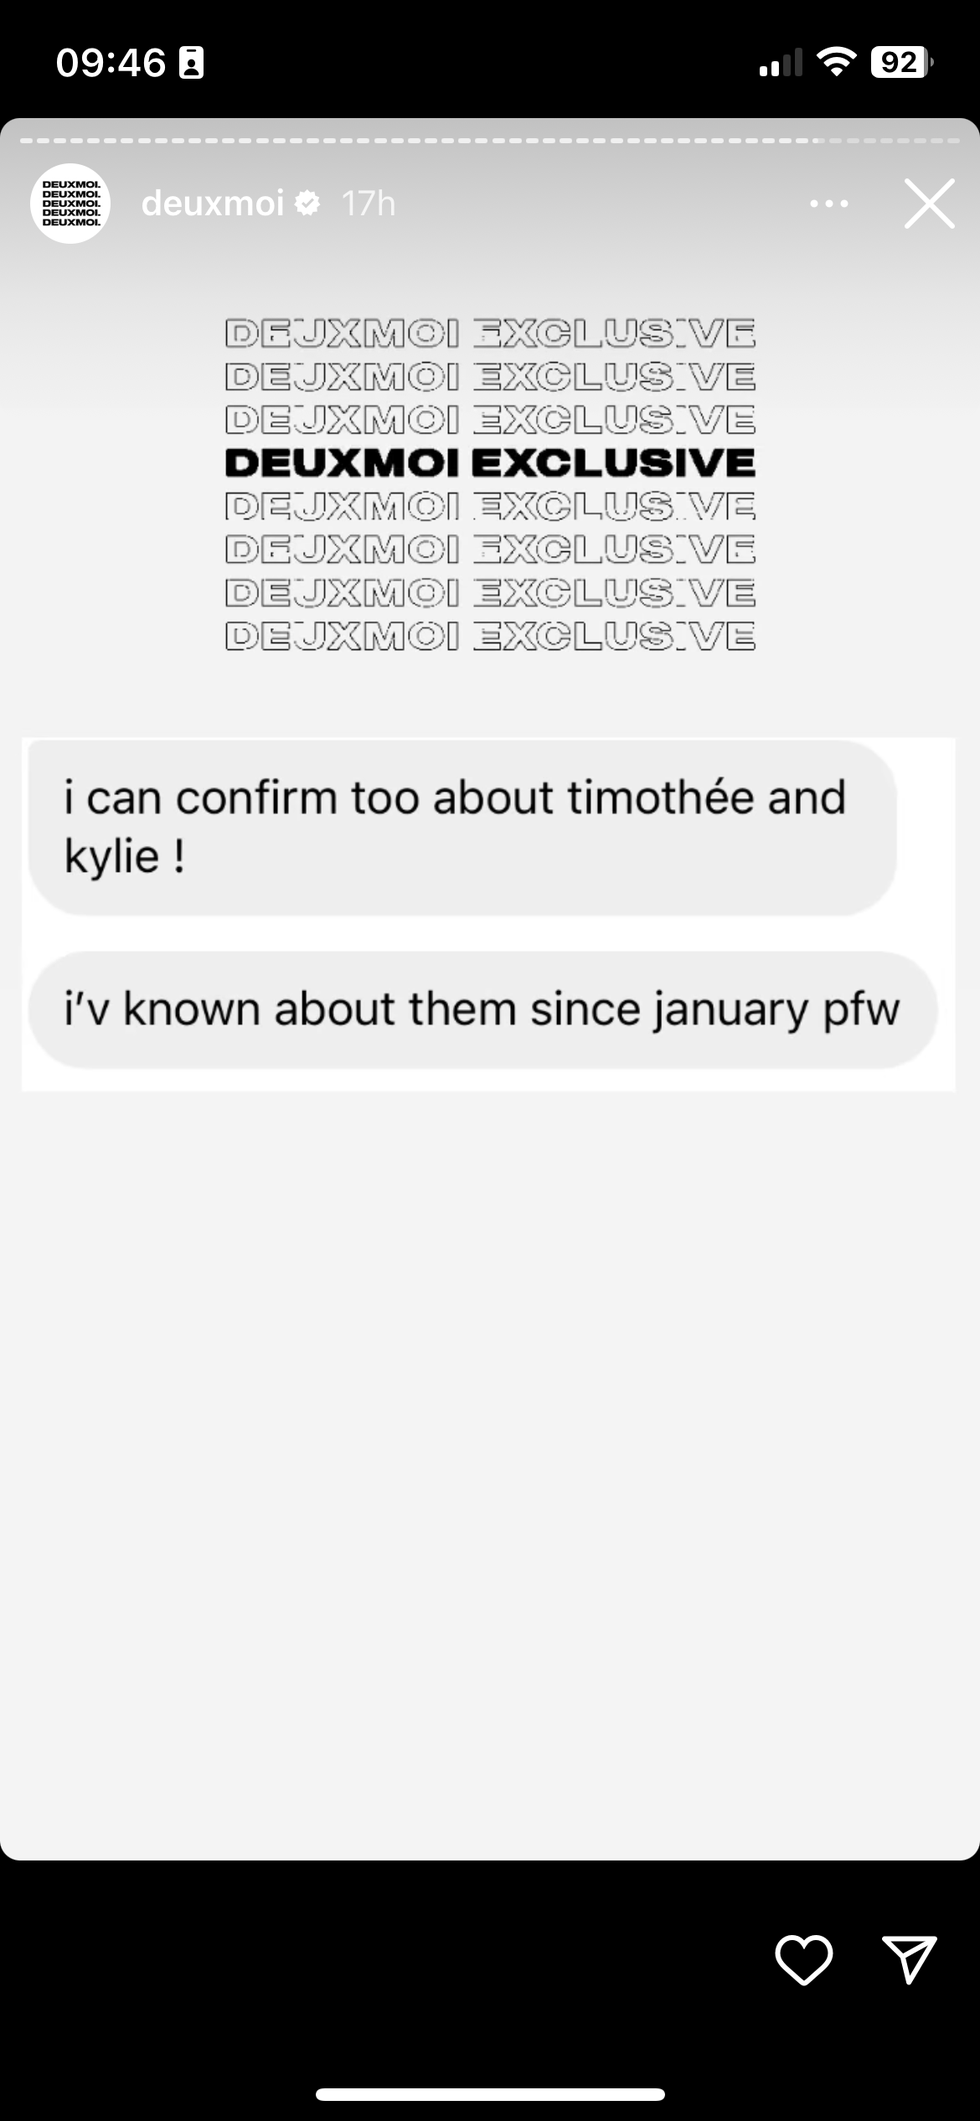 deuxmoi's submissions on kylie and timothée